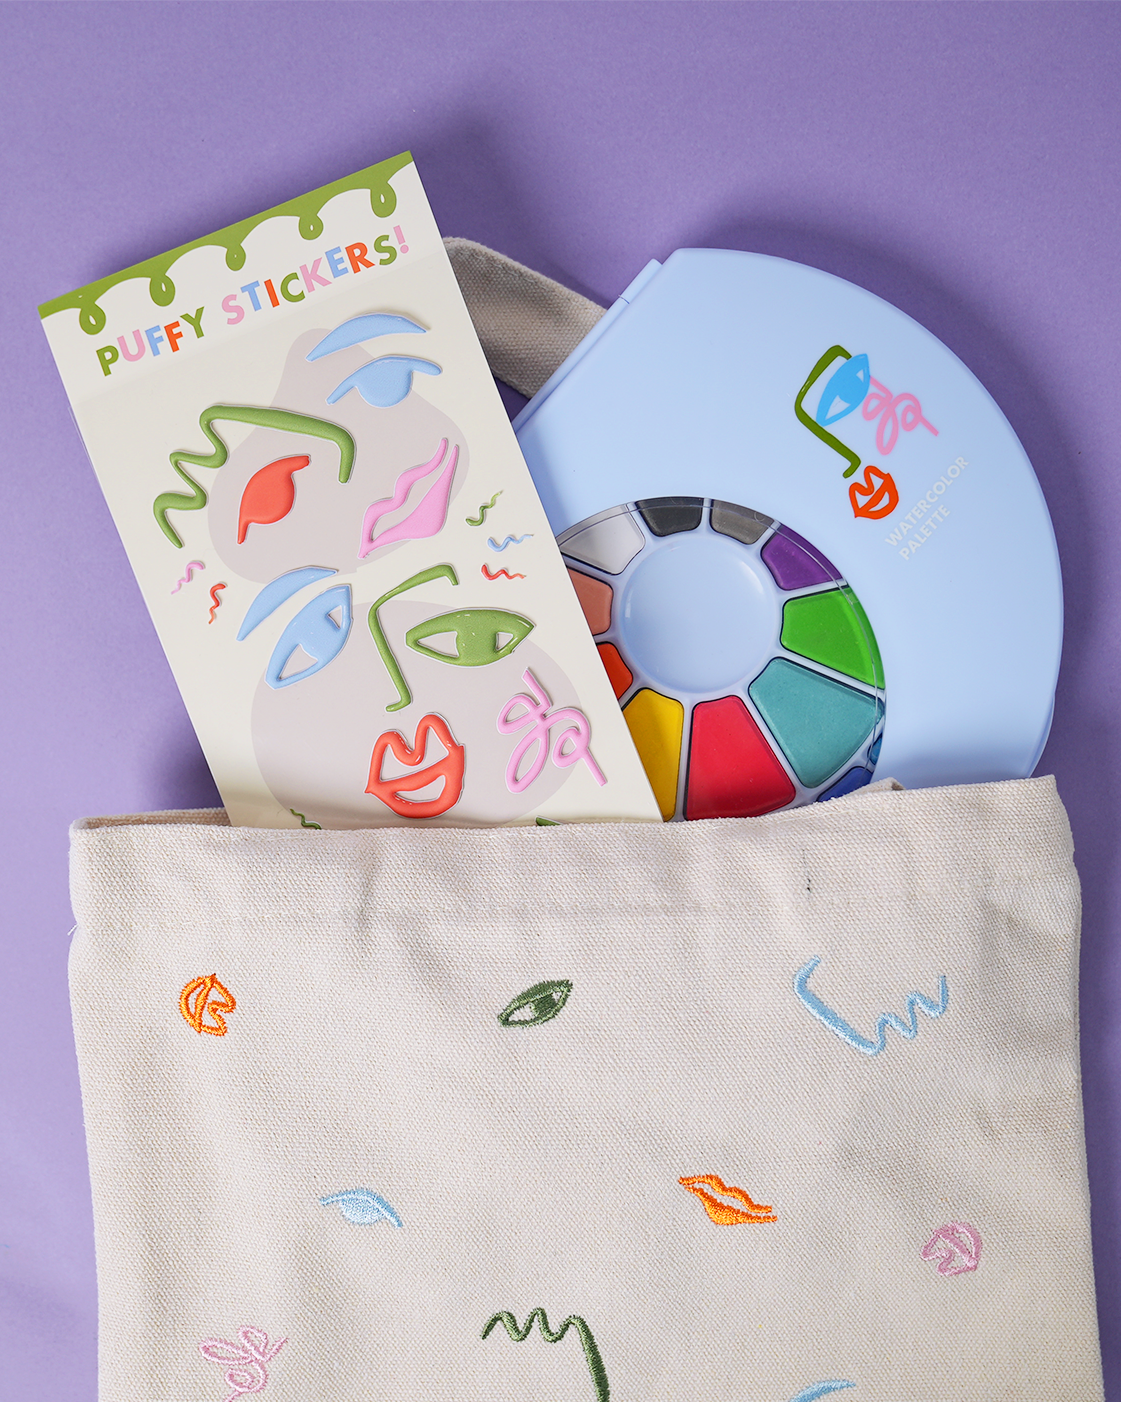 Art Party Embroidered Canvas Mini ToteIdeal for all kids party essentials, this chic, kid-sized embroidered tote can double as party-favor bags and even a special present - perfect for any occasion. Add POP party suppliesArt Party Embroidered Canvas Mini Tote mini tote bag